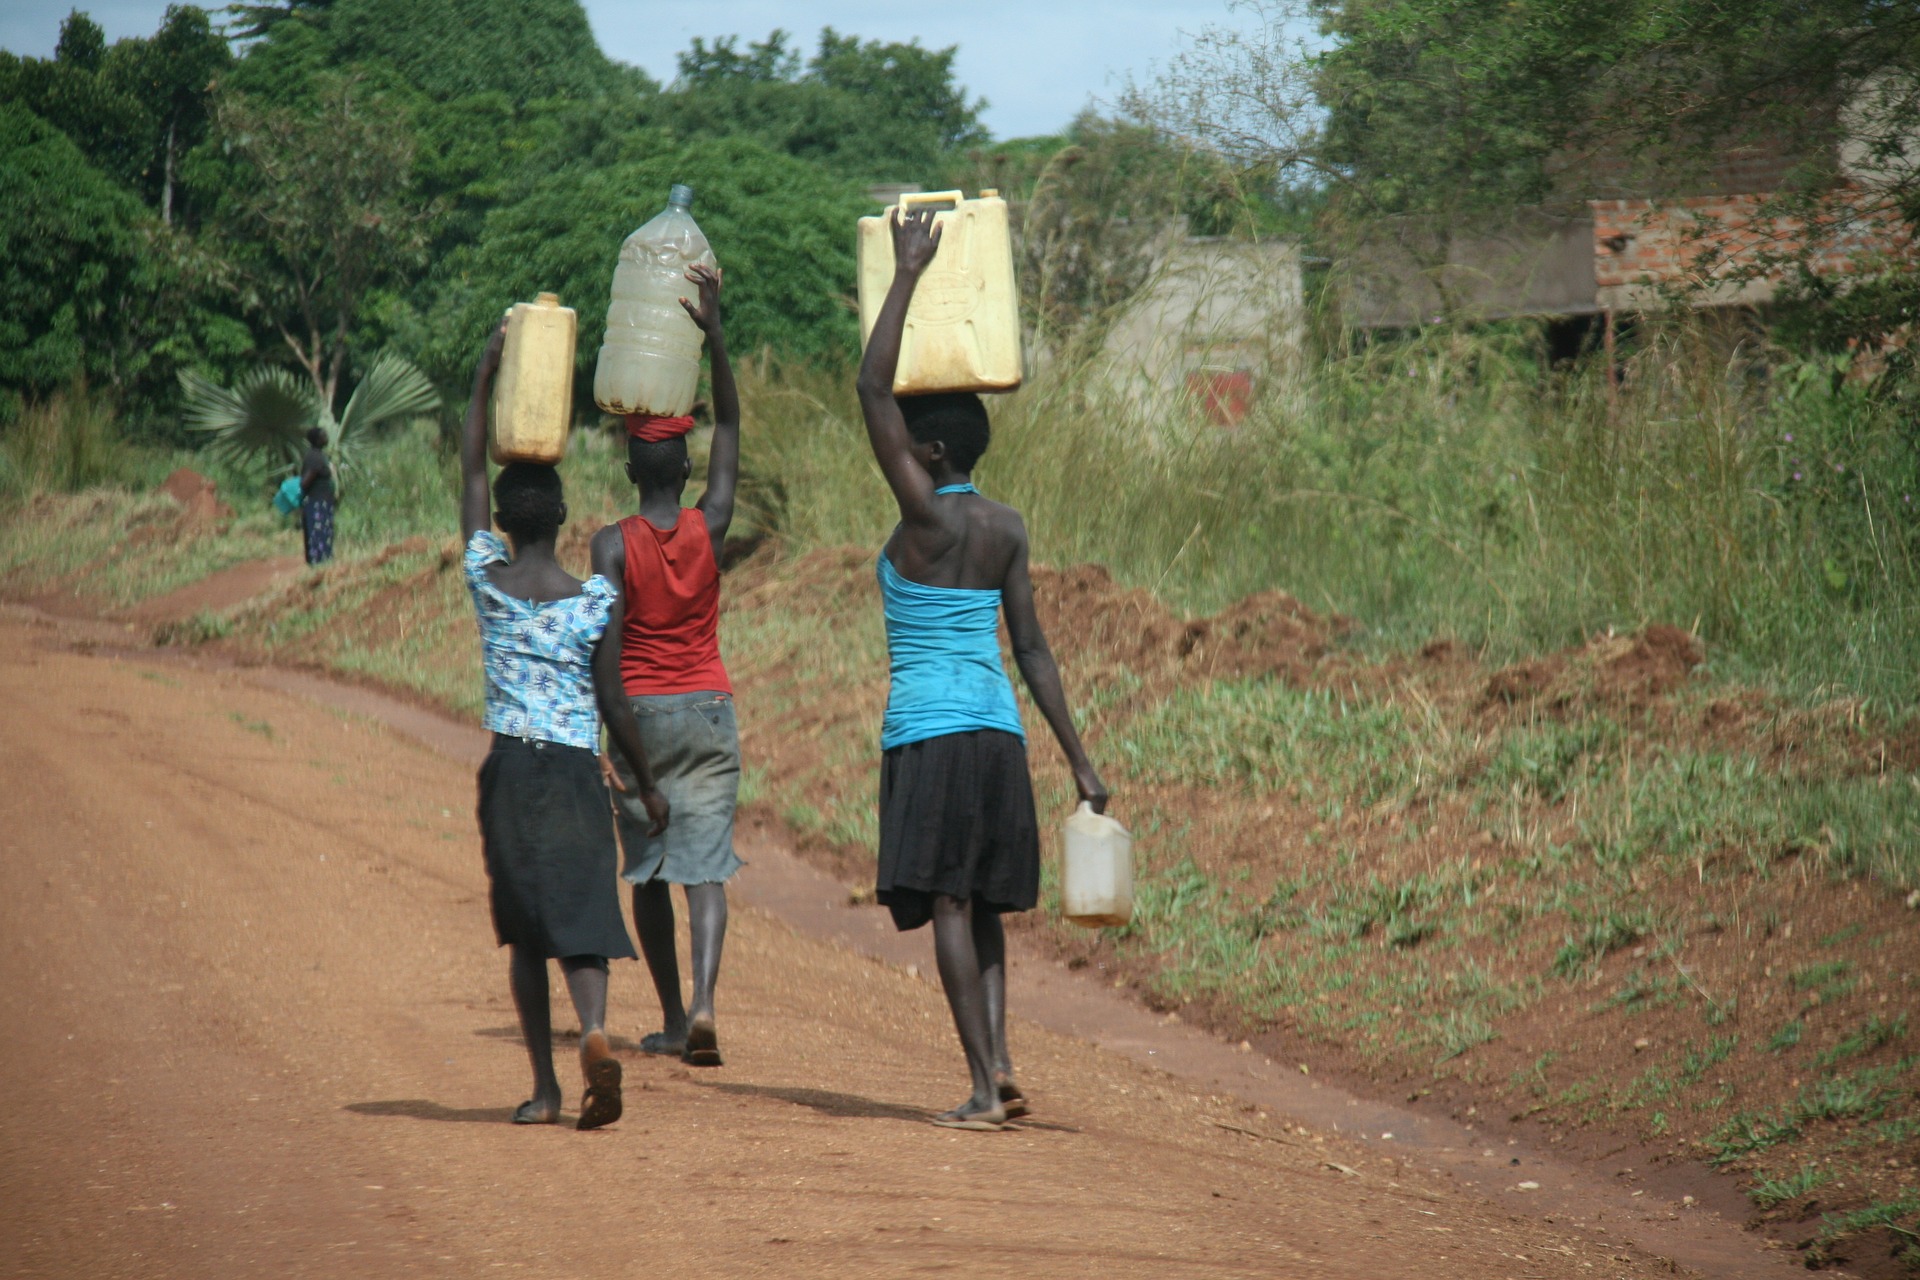 Image of women in Sub-Saharan Africa carrying water on their heads.